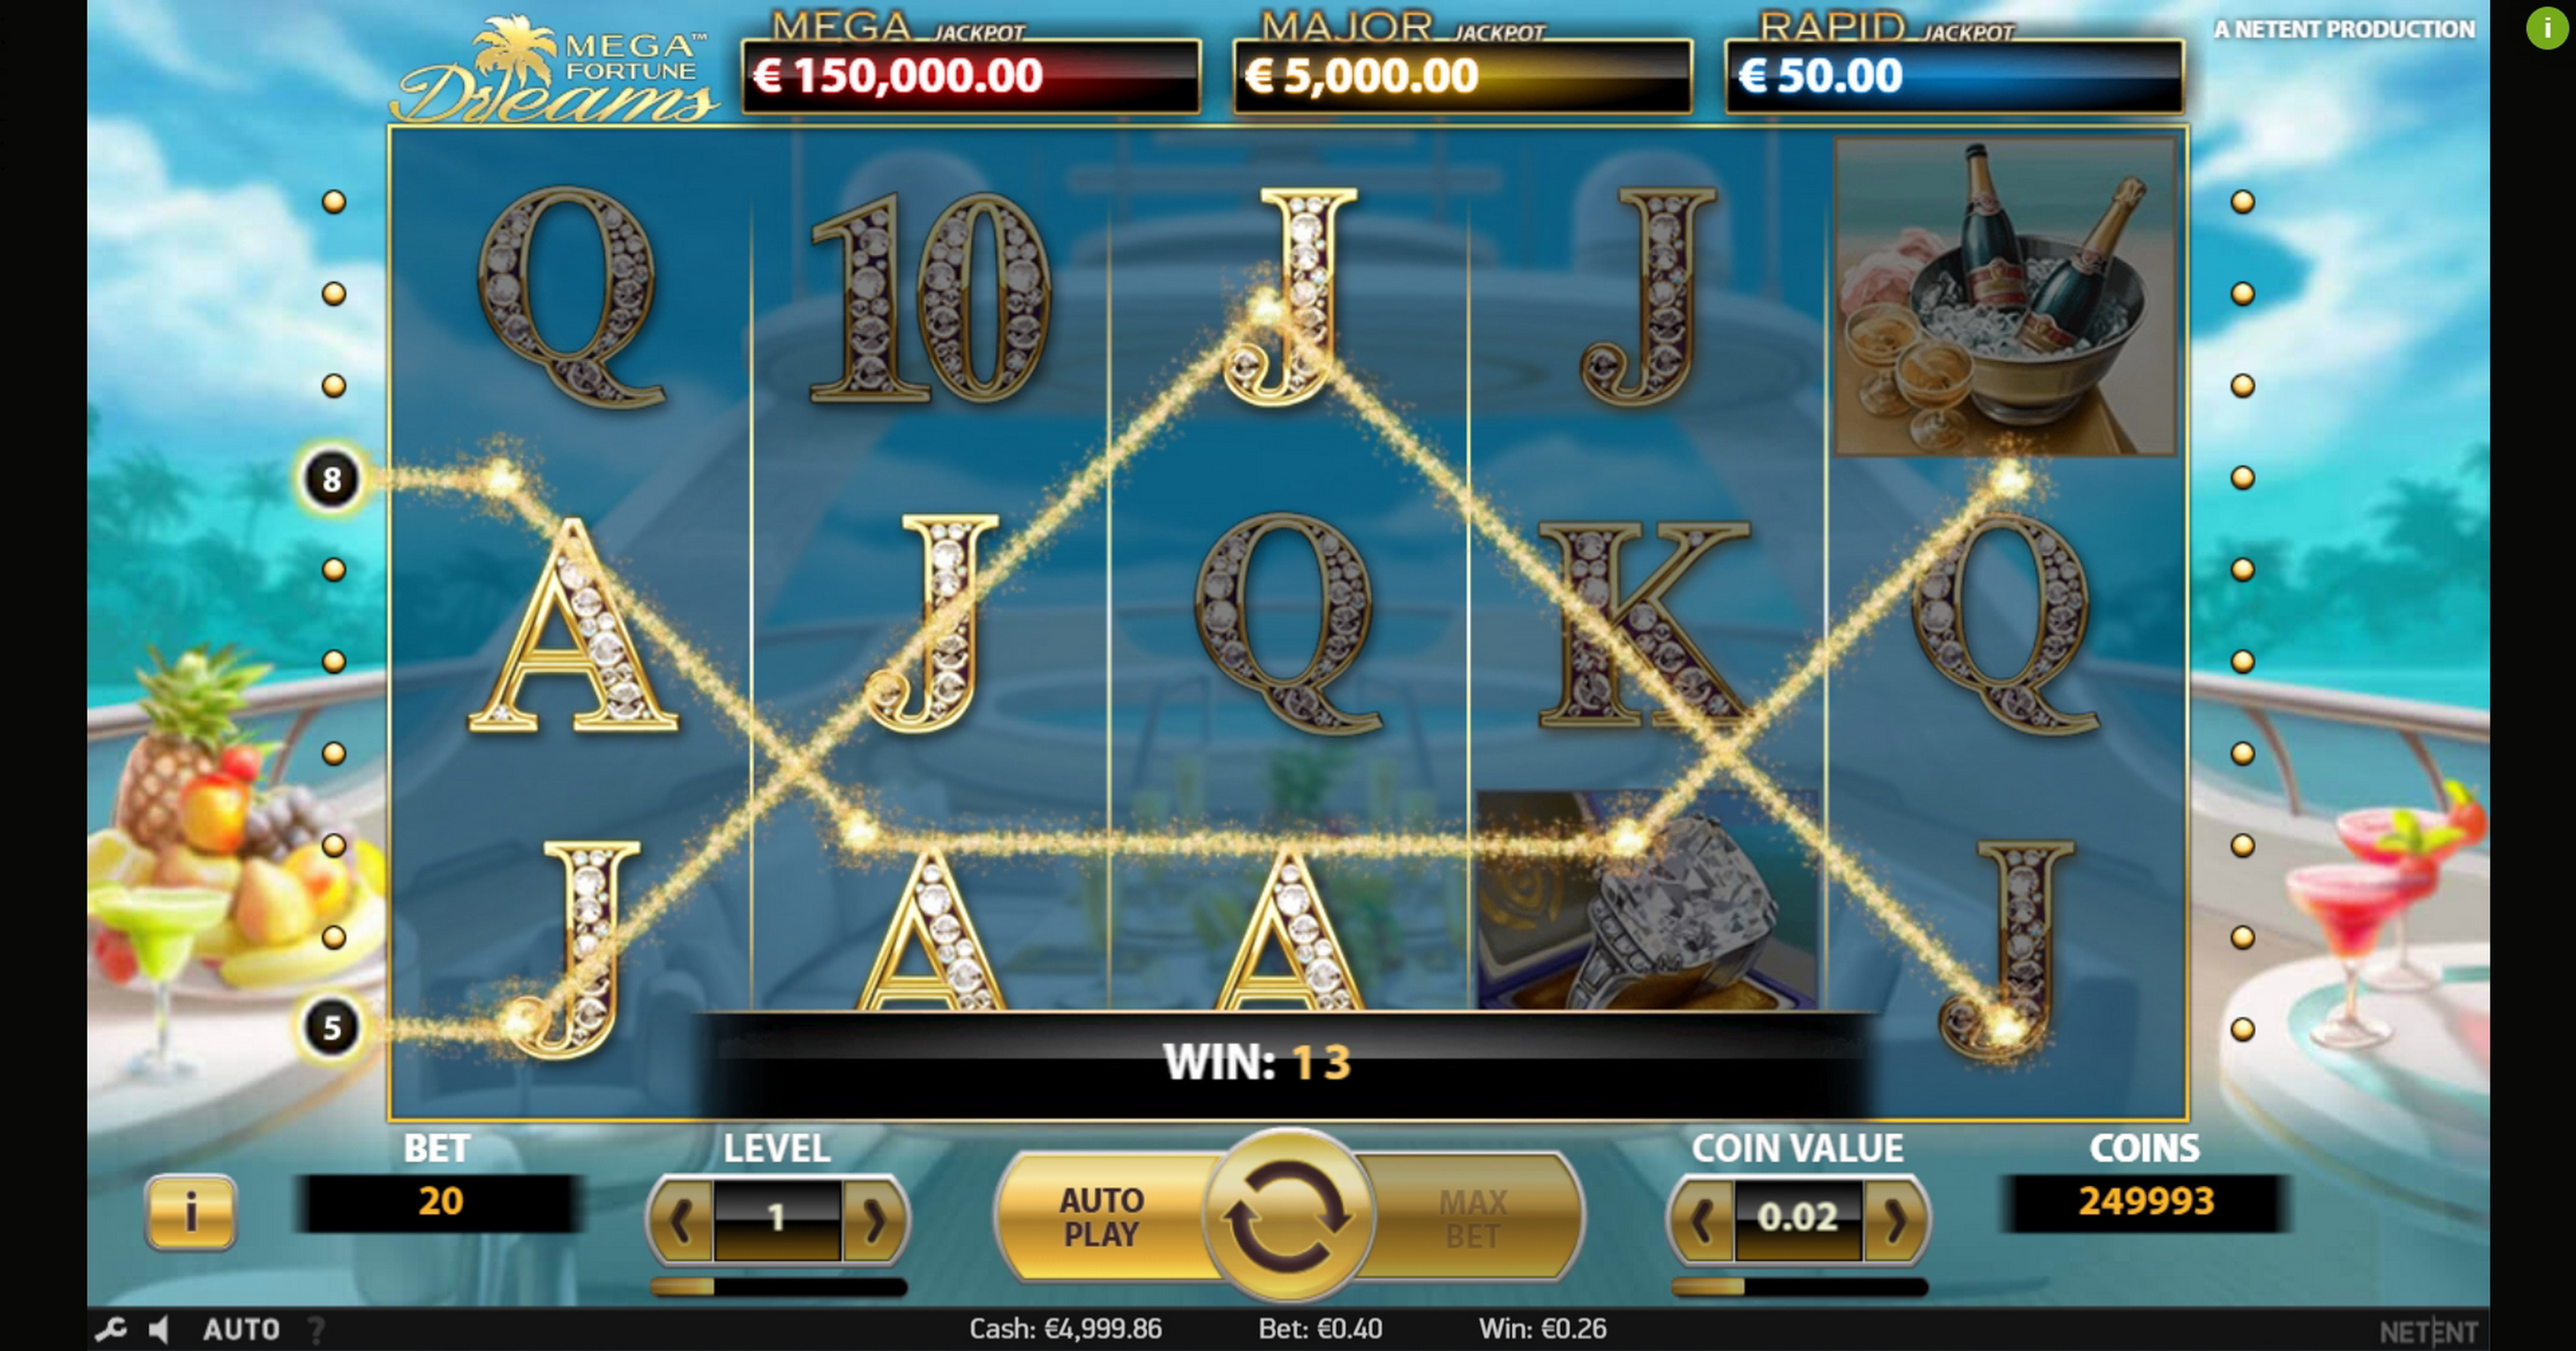 Win Money in Mega fortune dreams Free Slot Game by NetEnt